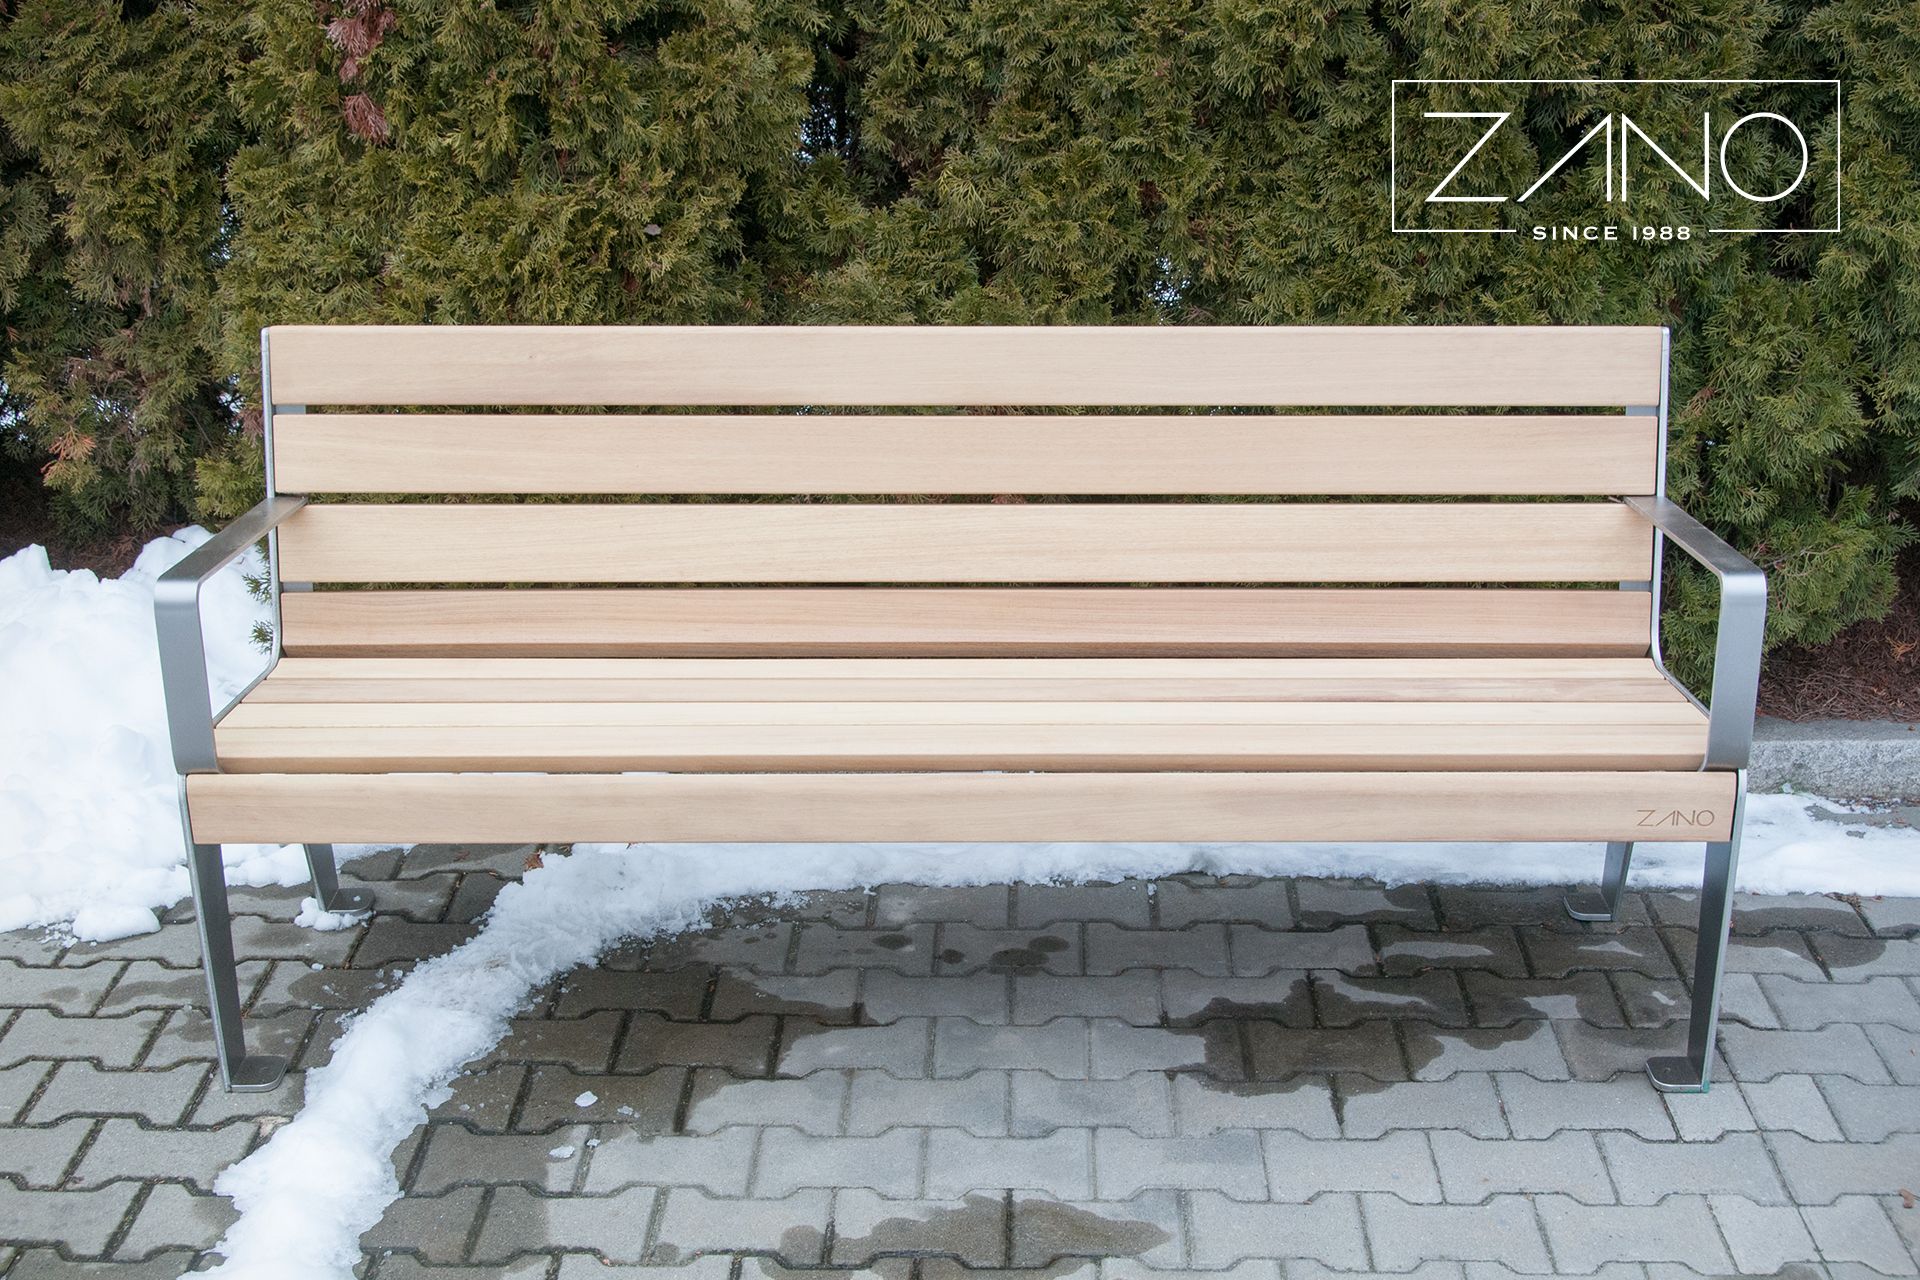 City bench made of stainless steel and hardwood